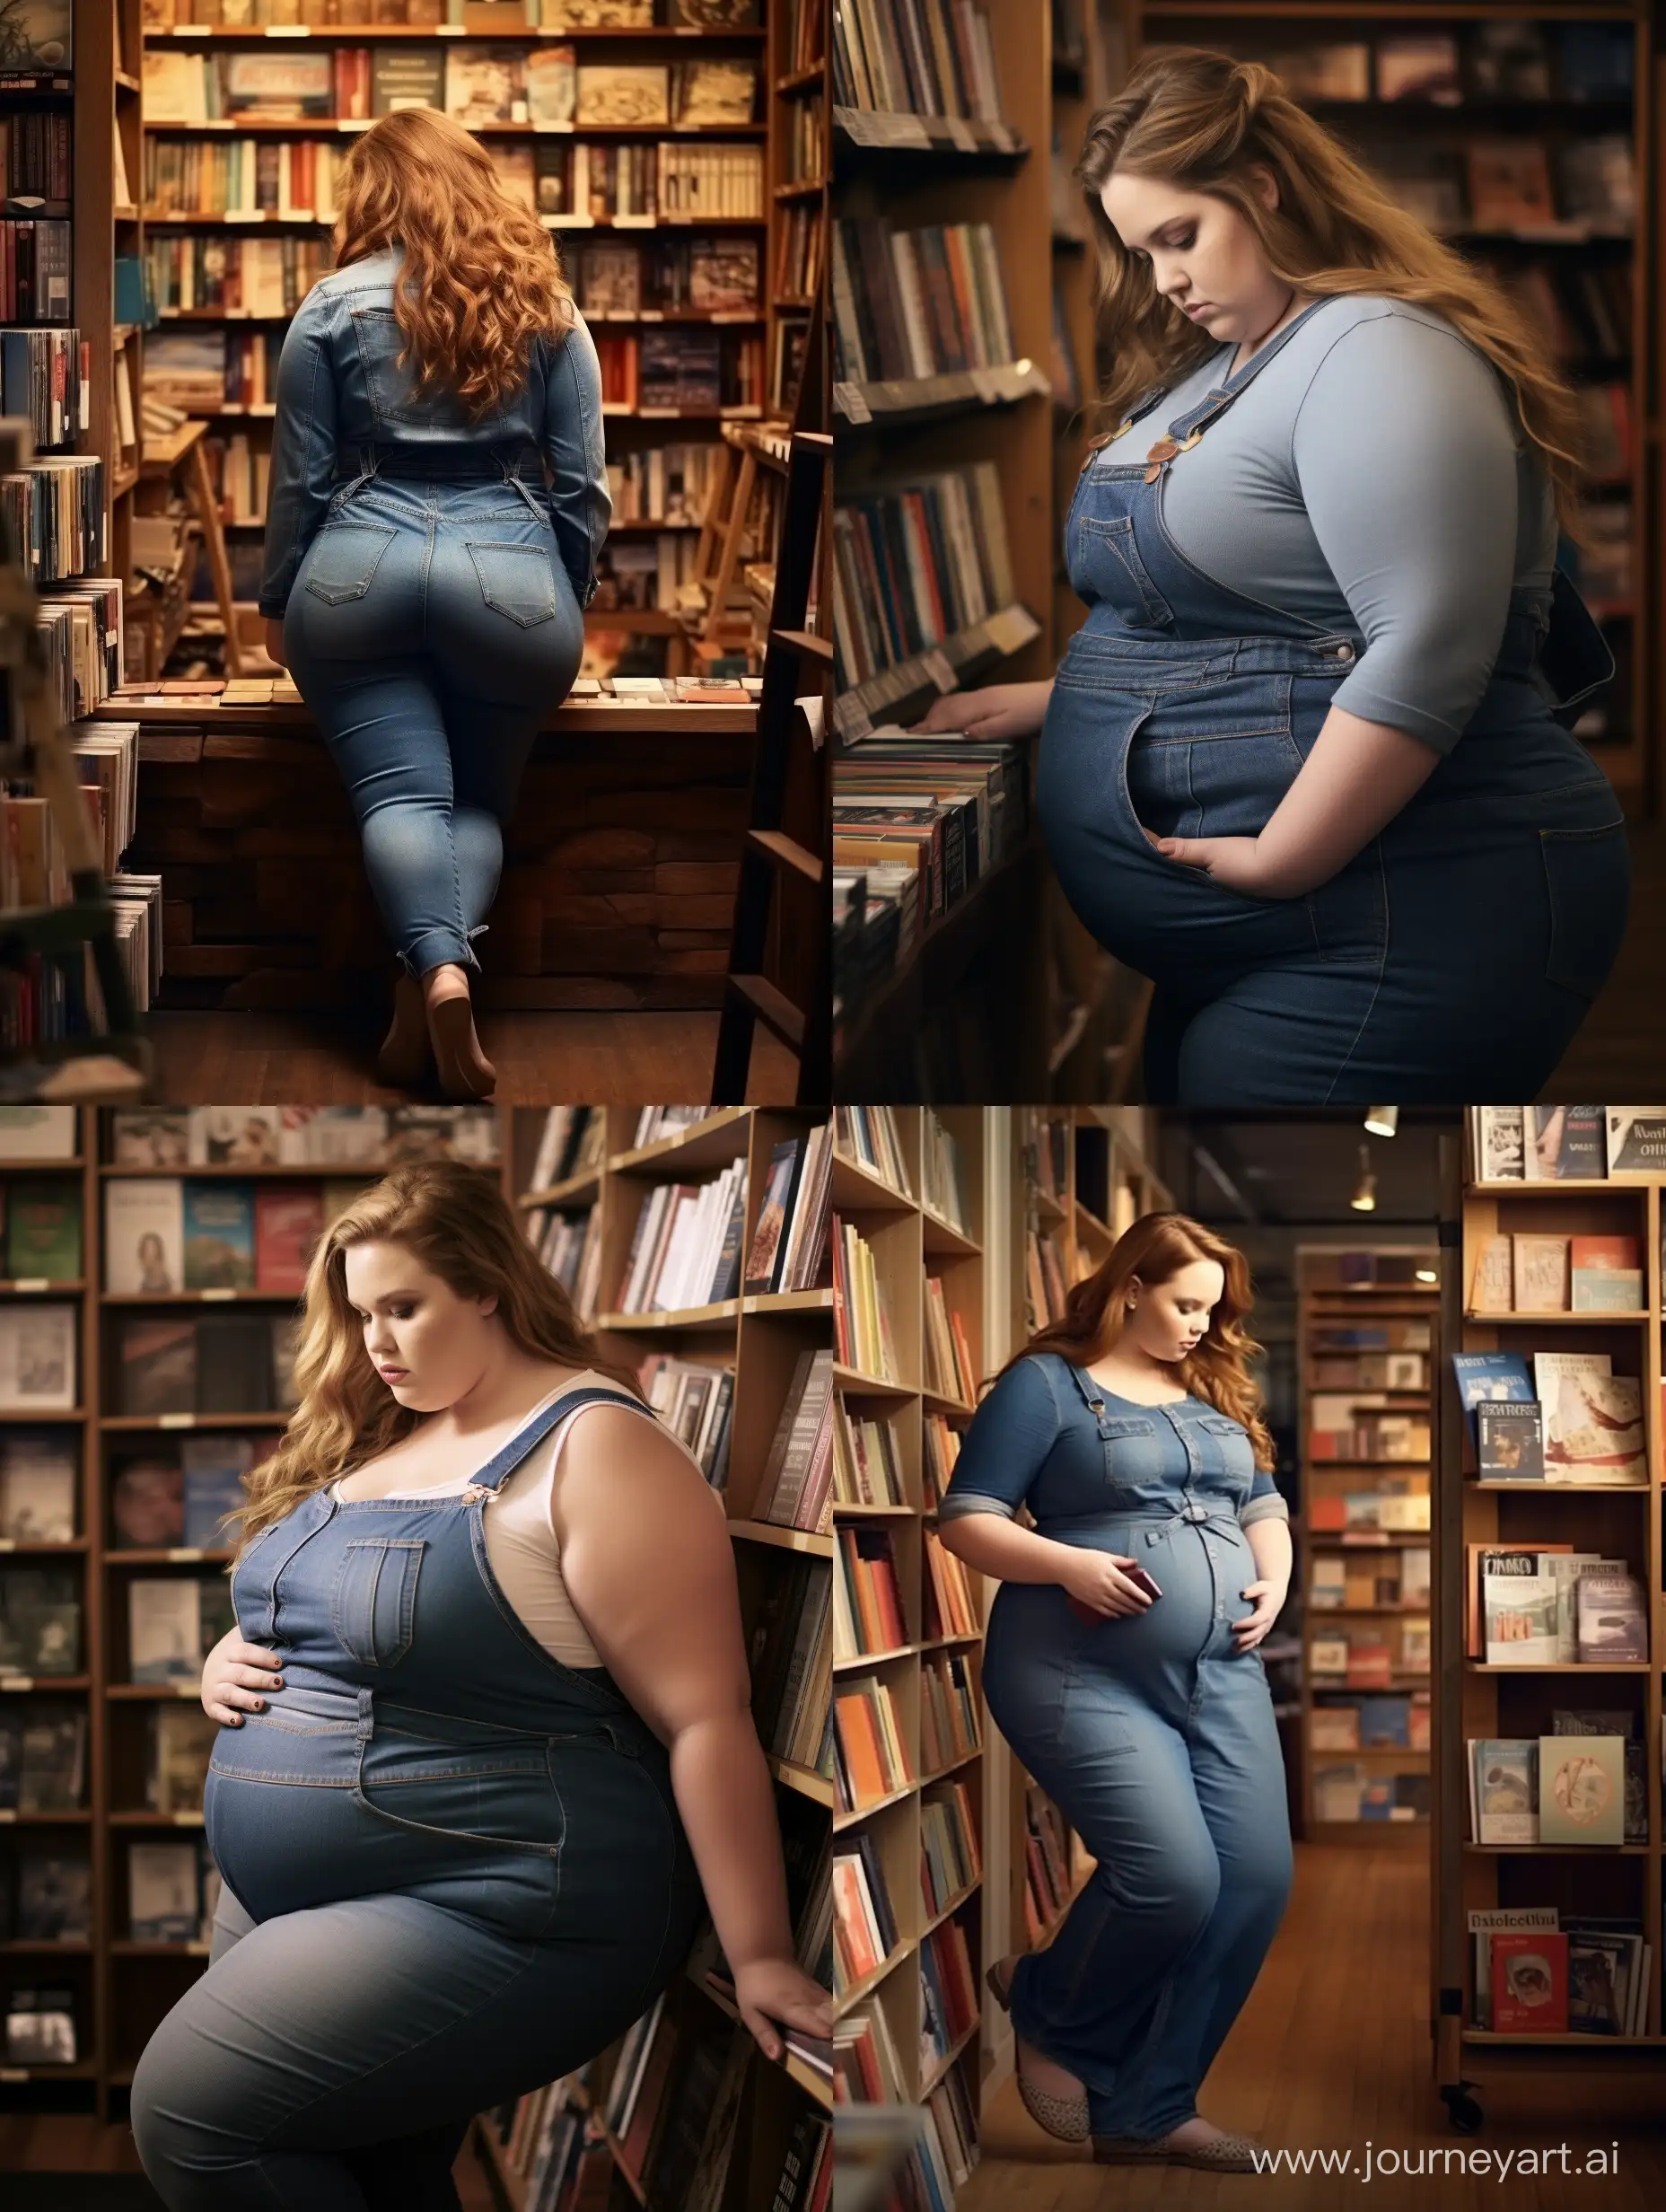 High quality photo. Book store setting. Pregnant Obese woman with a huge massive Disproportionately enormous belly. She wears denim dungarees. Hand on back. She is looking at books.